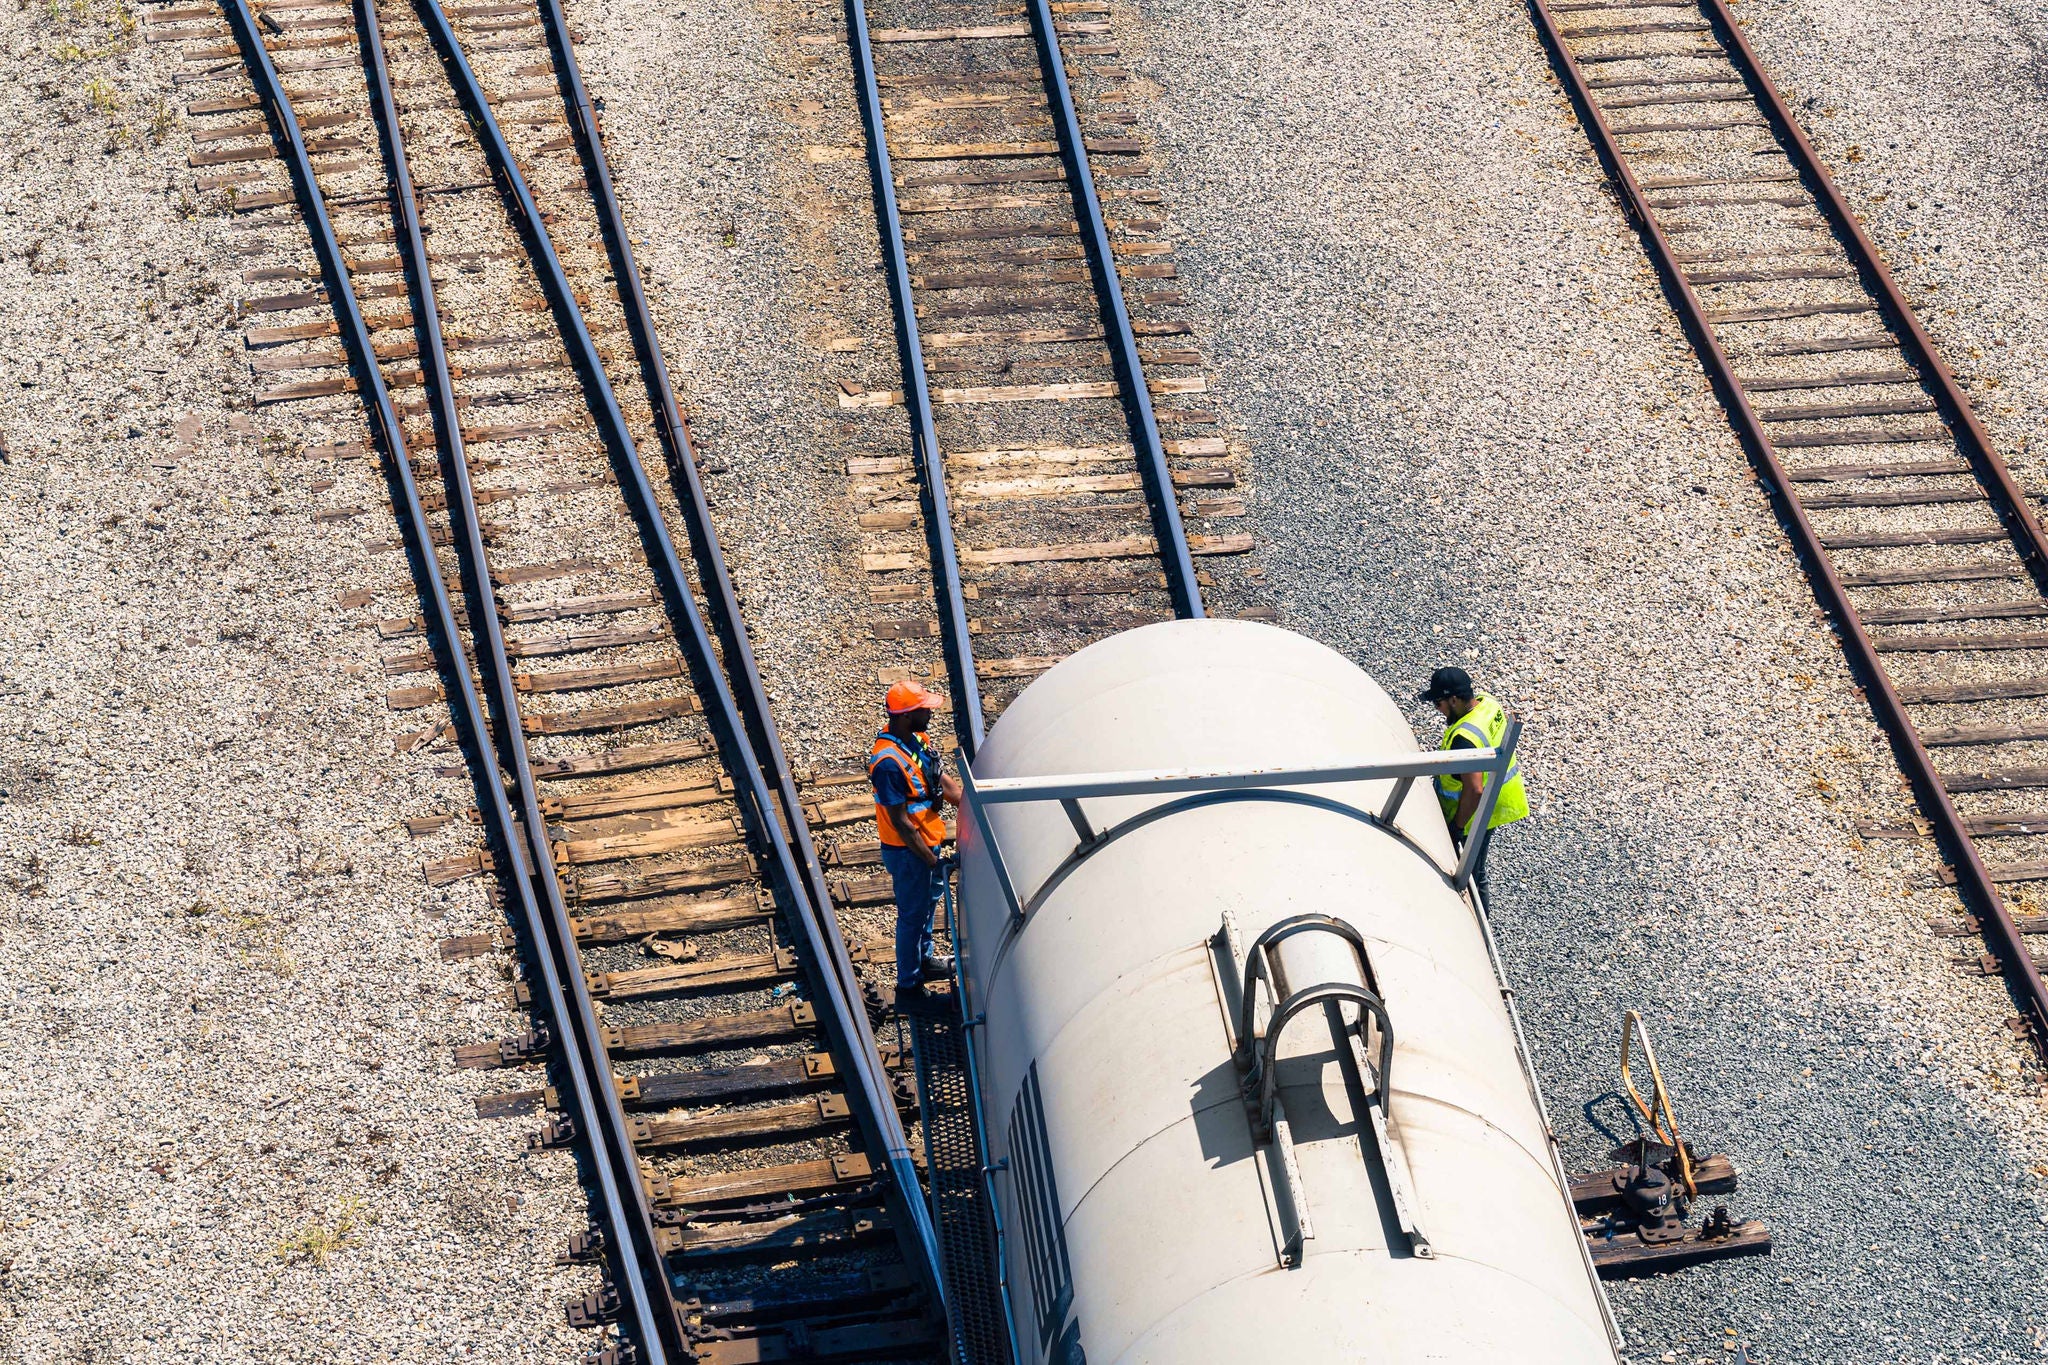 Norfolk Southern white chemical railcar at railyard facility on tracks with employees standing next to is